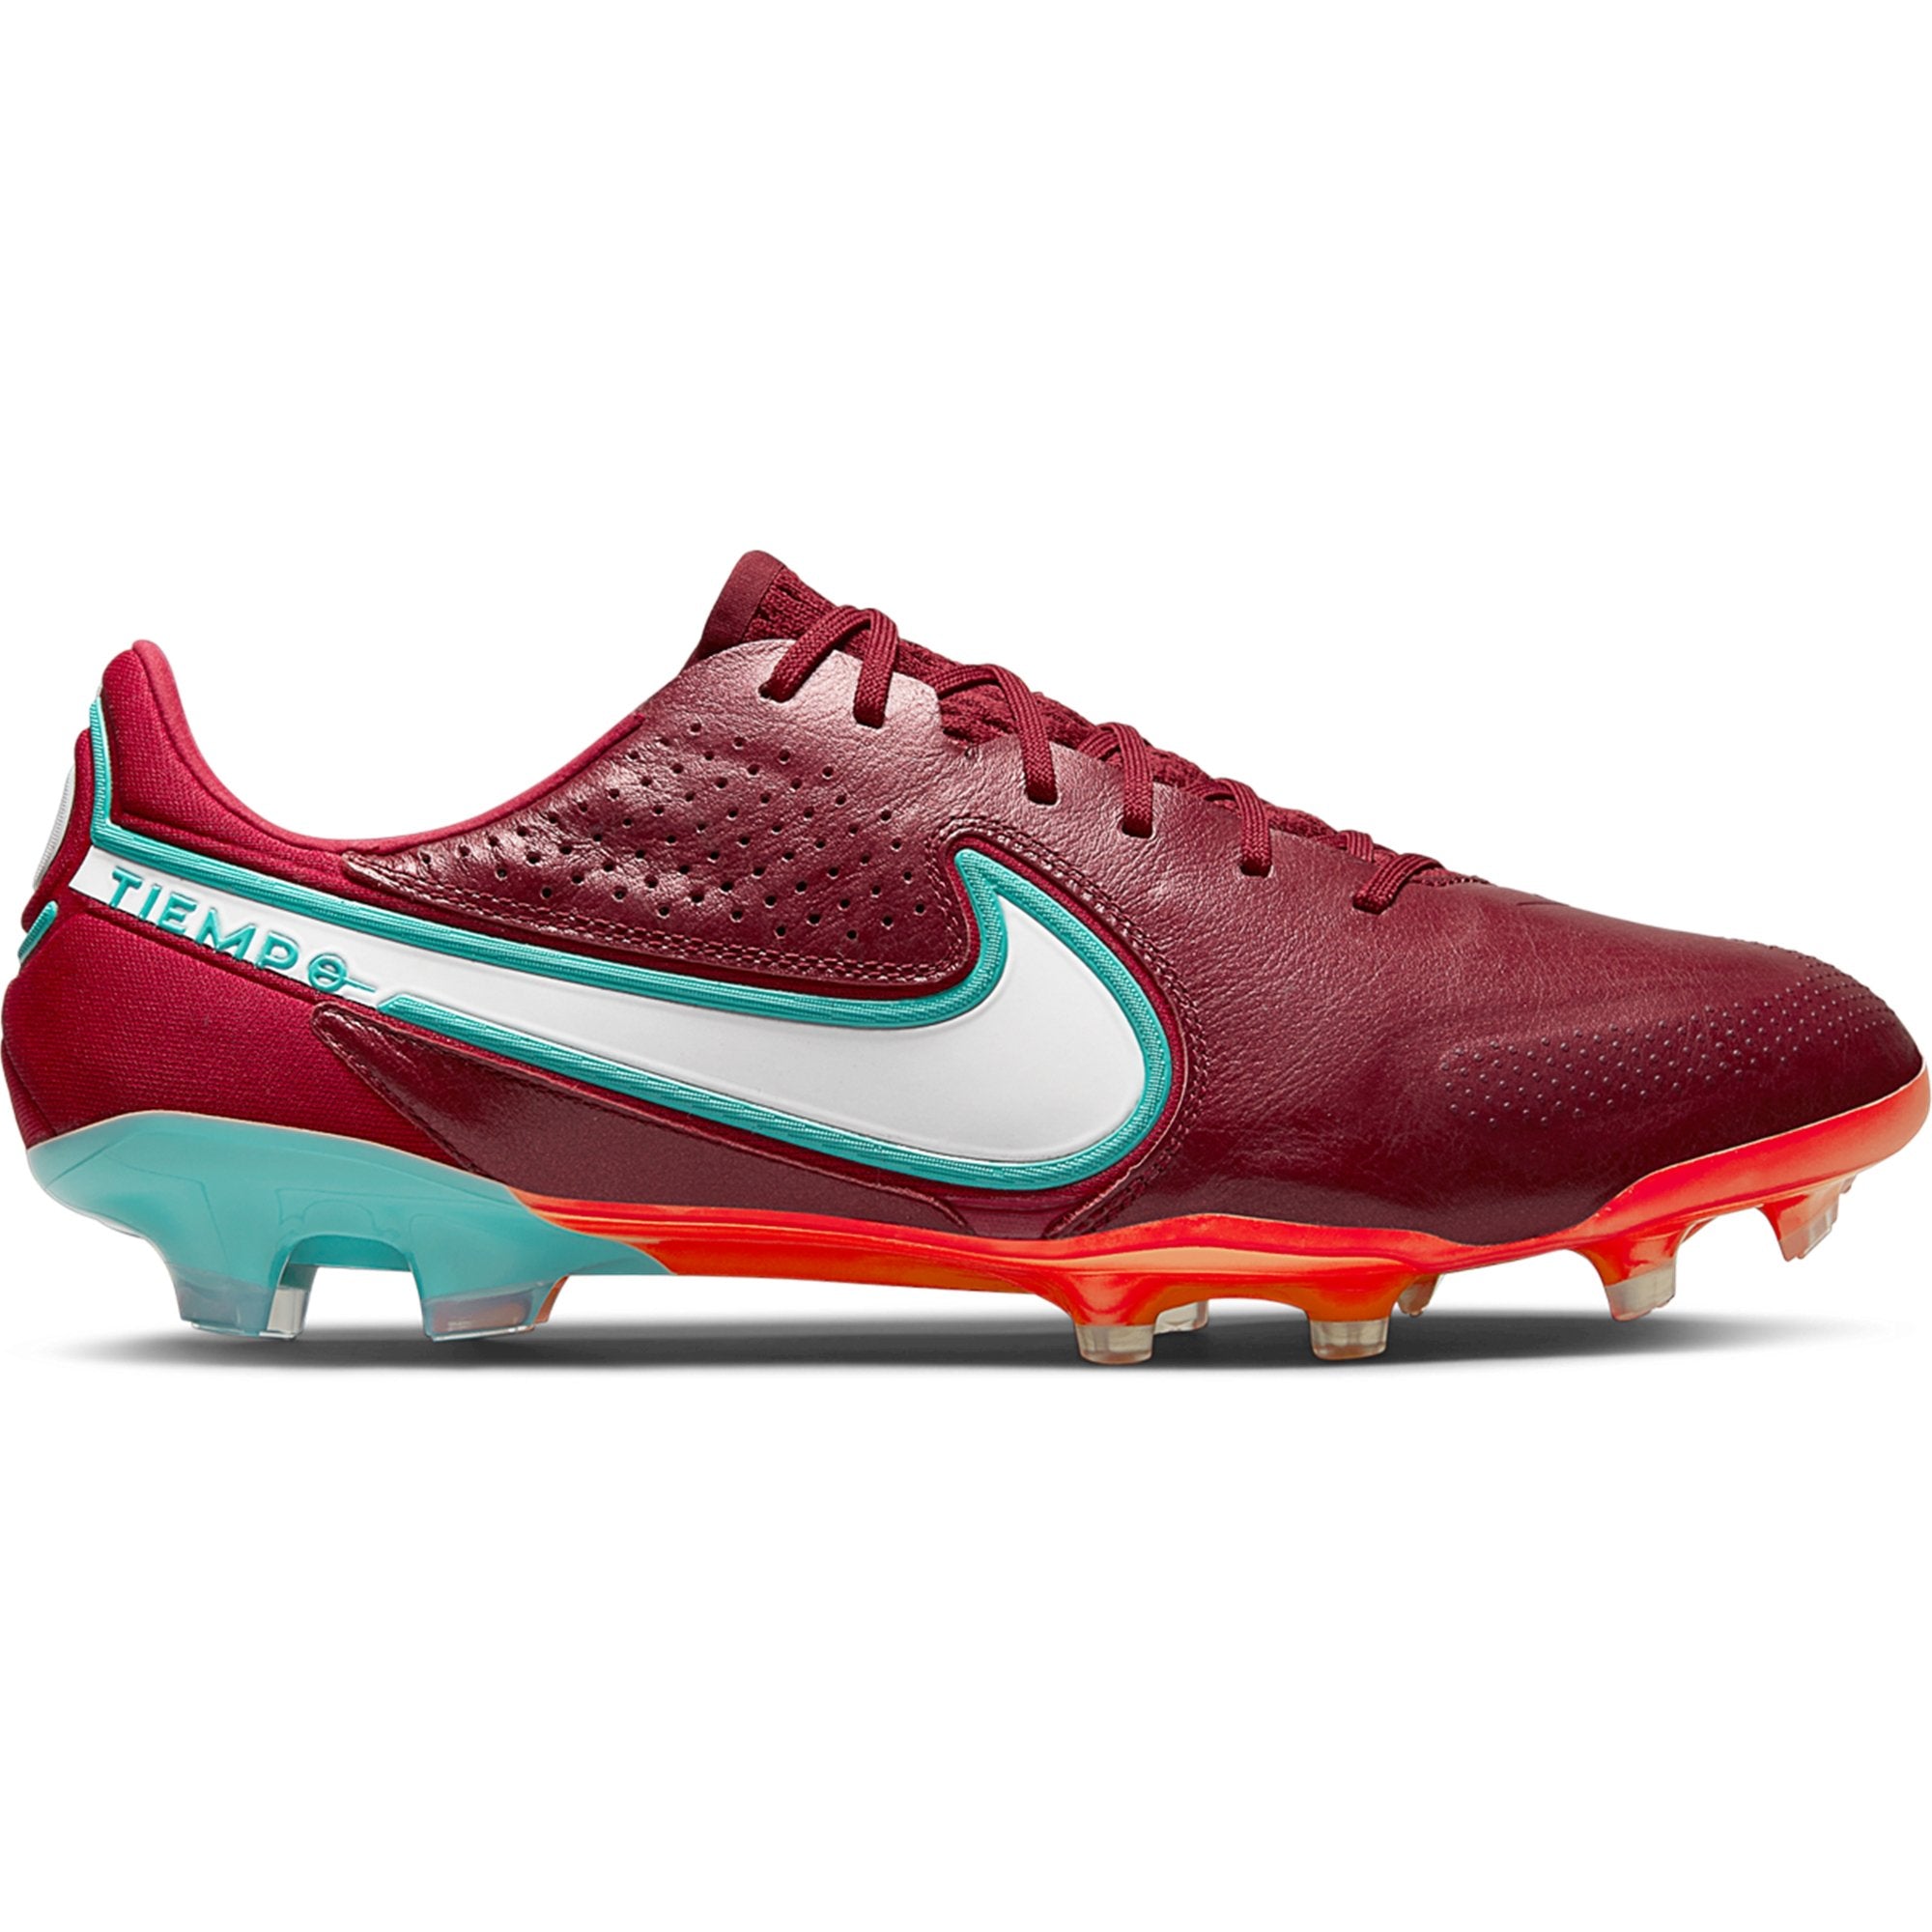 Glad Spin cassette Nike Tiempo Legend 9 Elite FG Firm Ground Soccer Cleat Team Red/White/Mystic  Hibiscus/Bright Crimson/Dynamic Turquoise CZ8482-616 – Soccer Zone USA